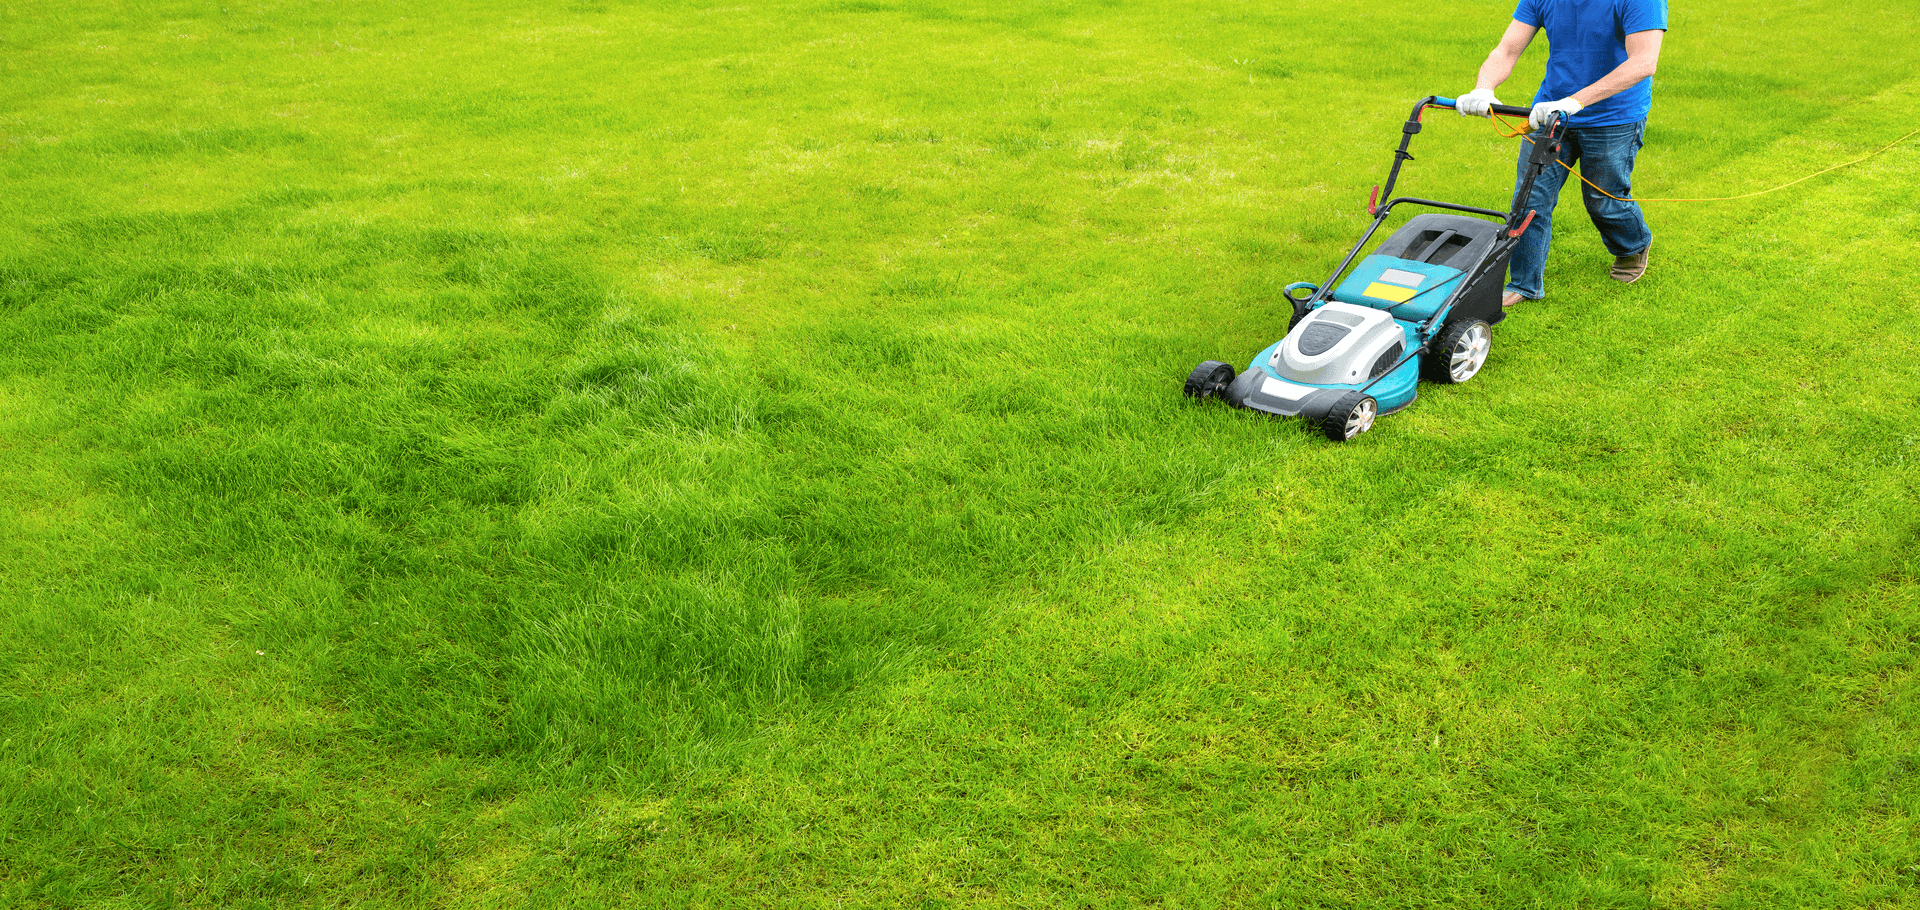 Diy lawn care tips for homeowners